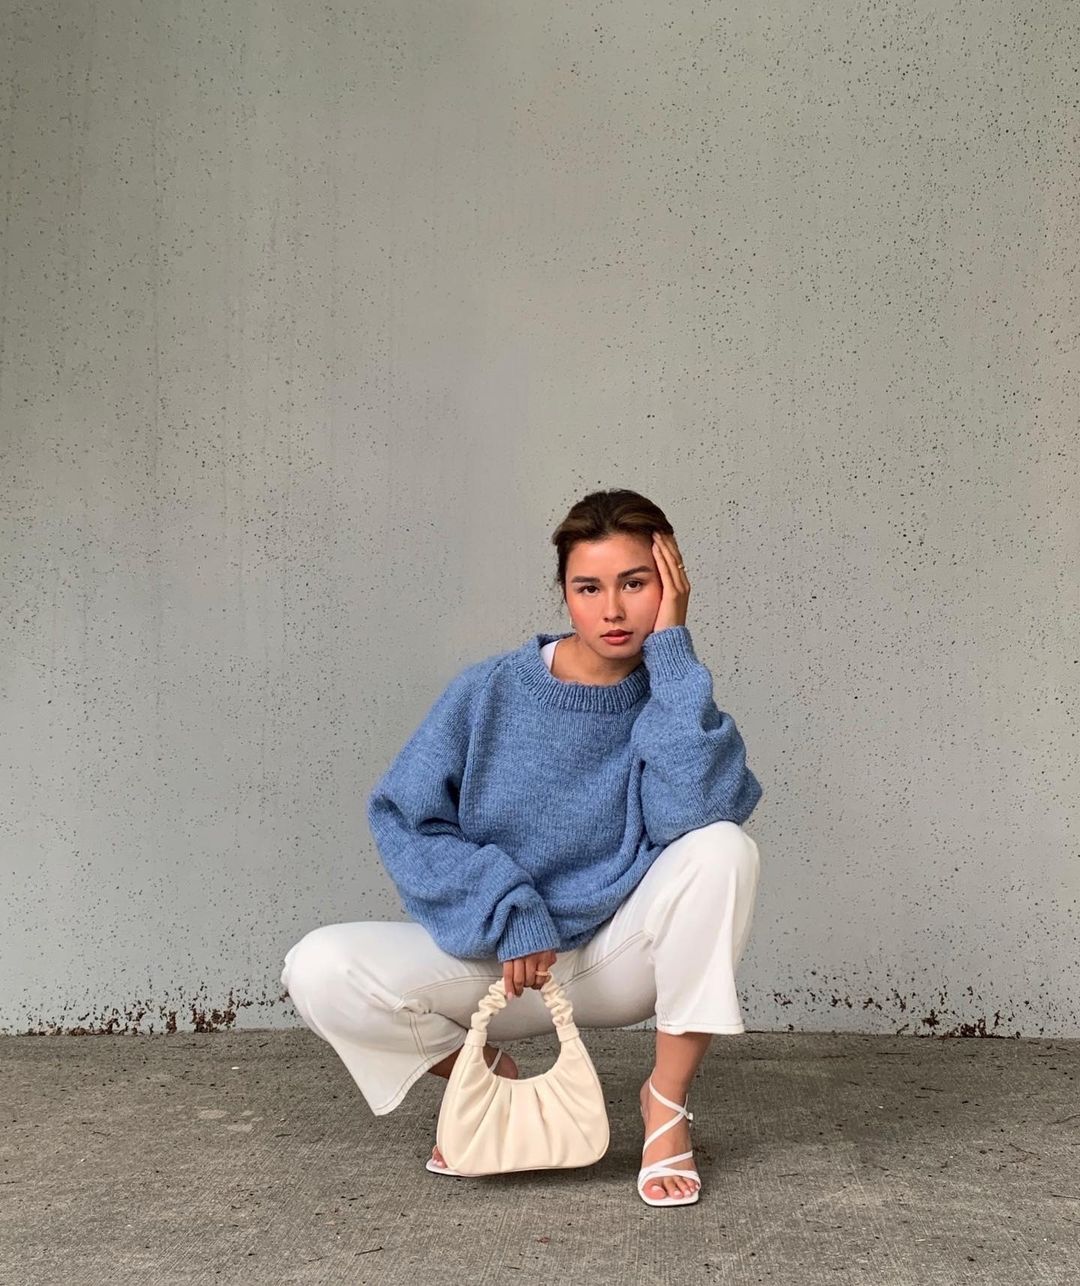 kianna kossowan holds a white gabbi bag by jw pei in front of a white wall